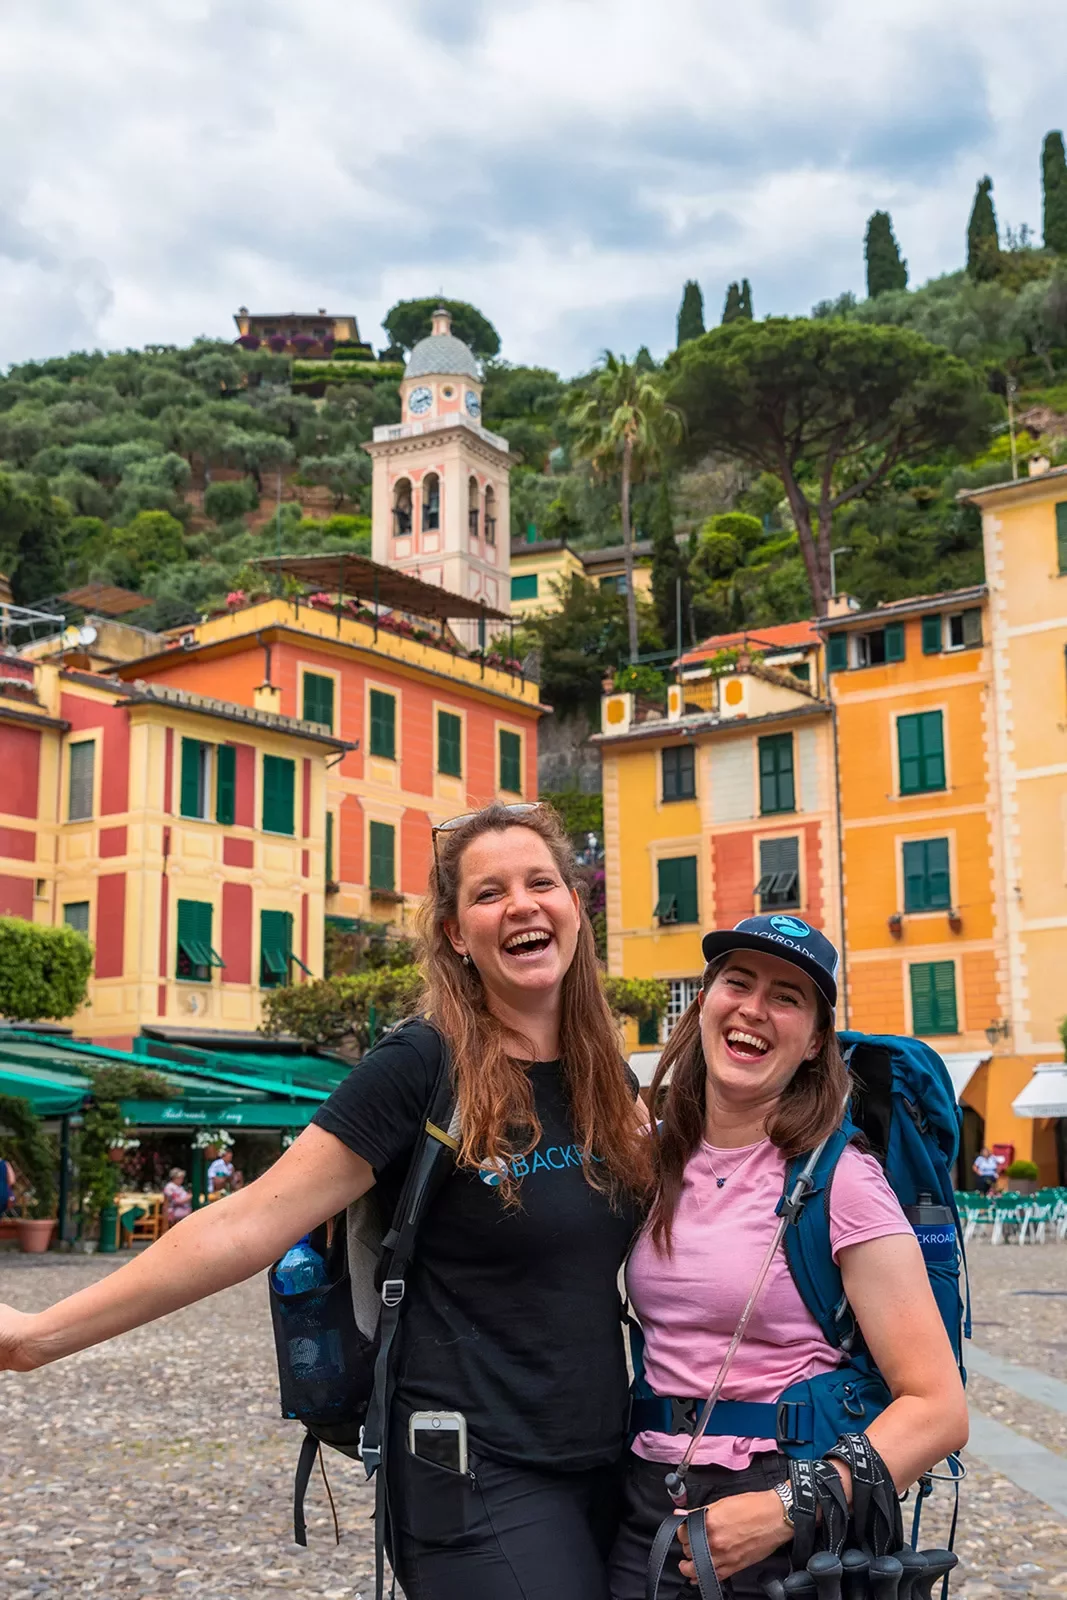 Two smiling guests in front of colorful buildings.